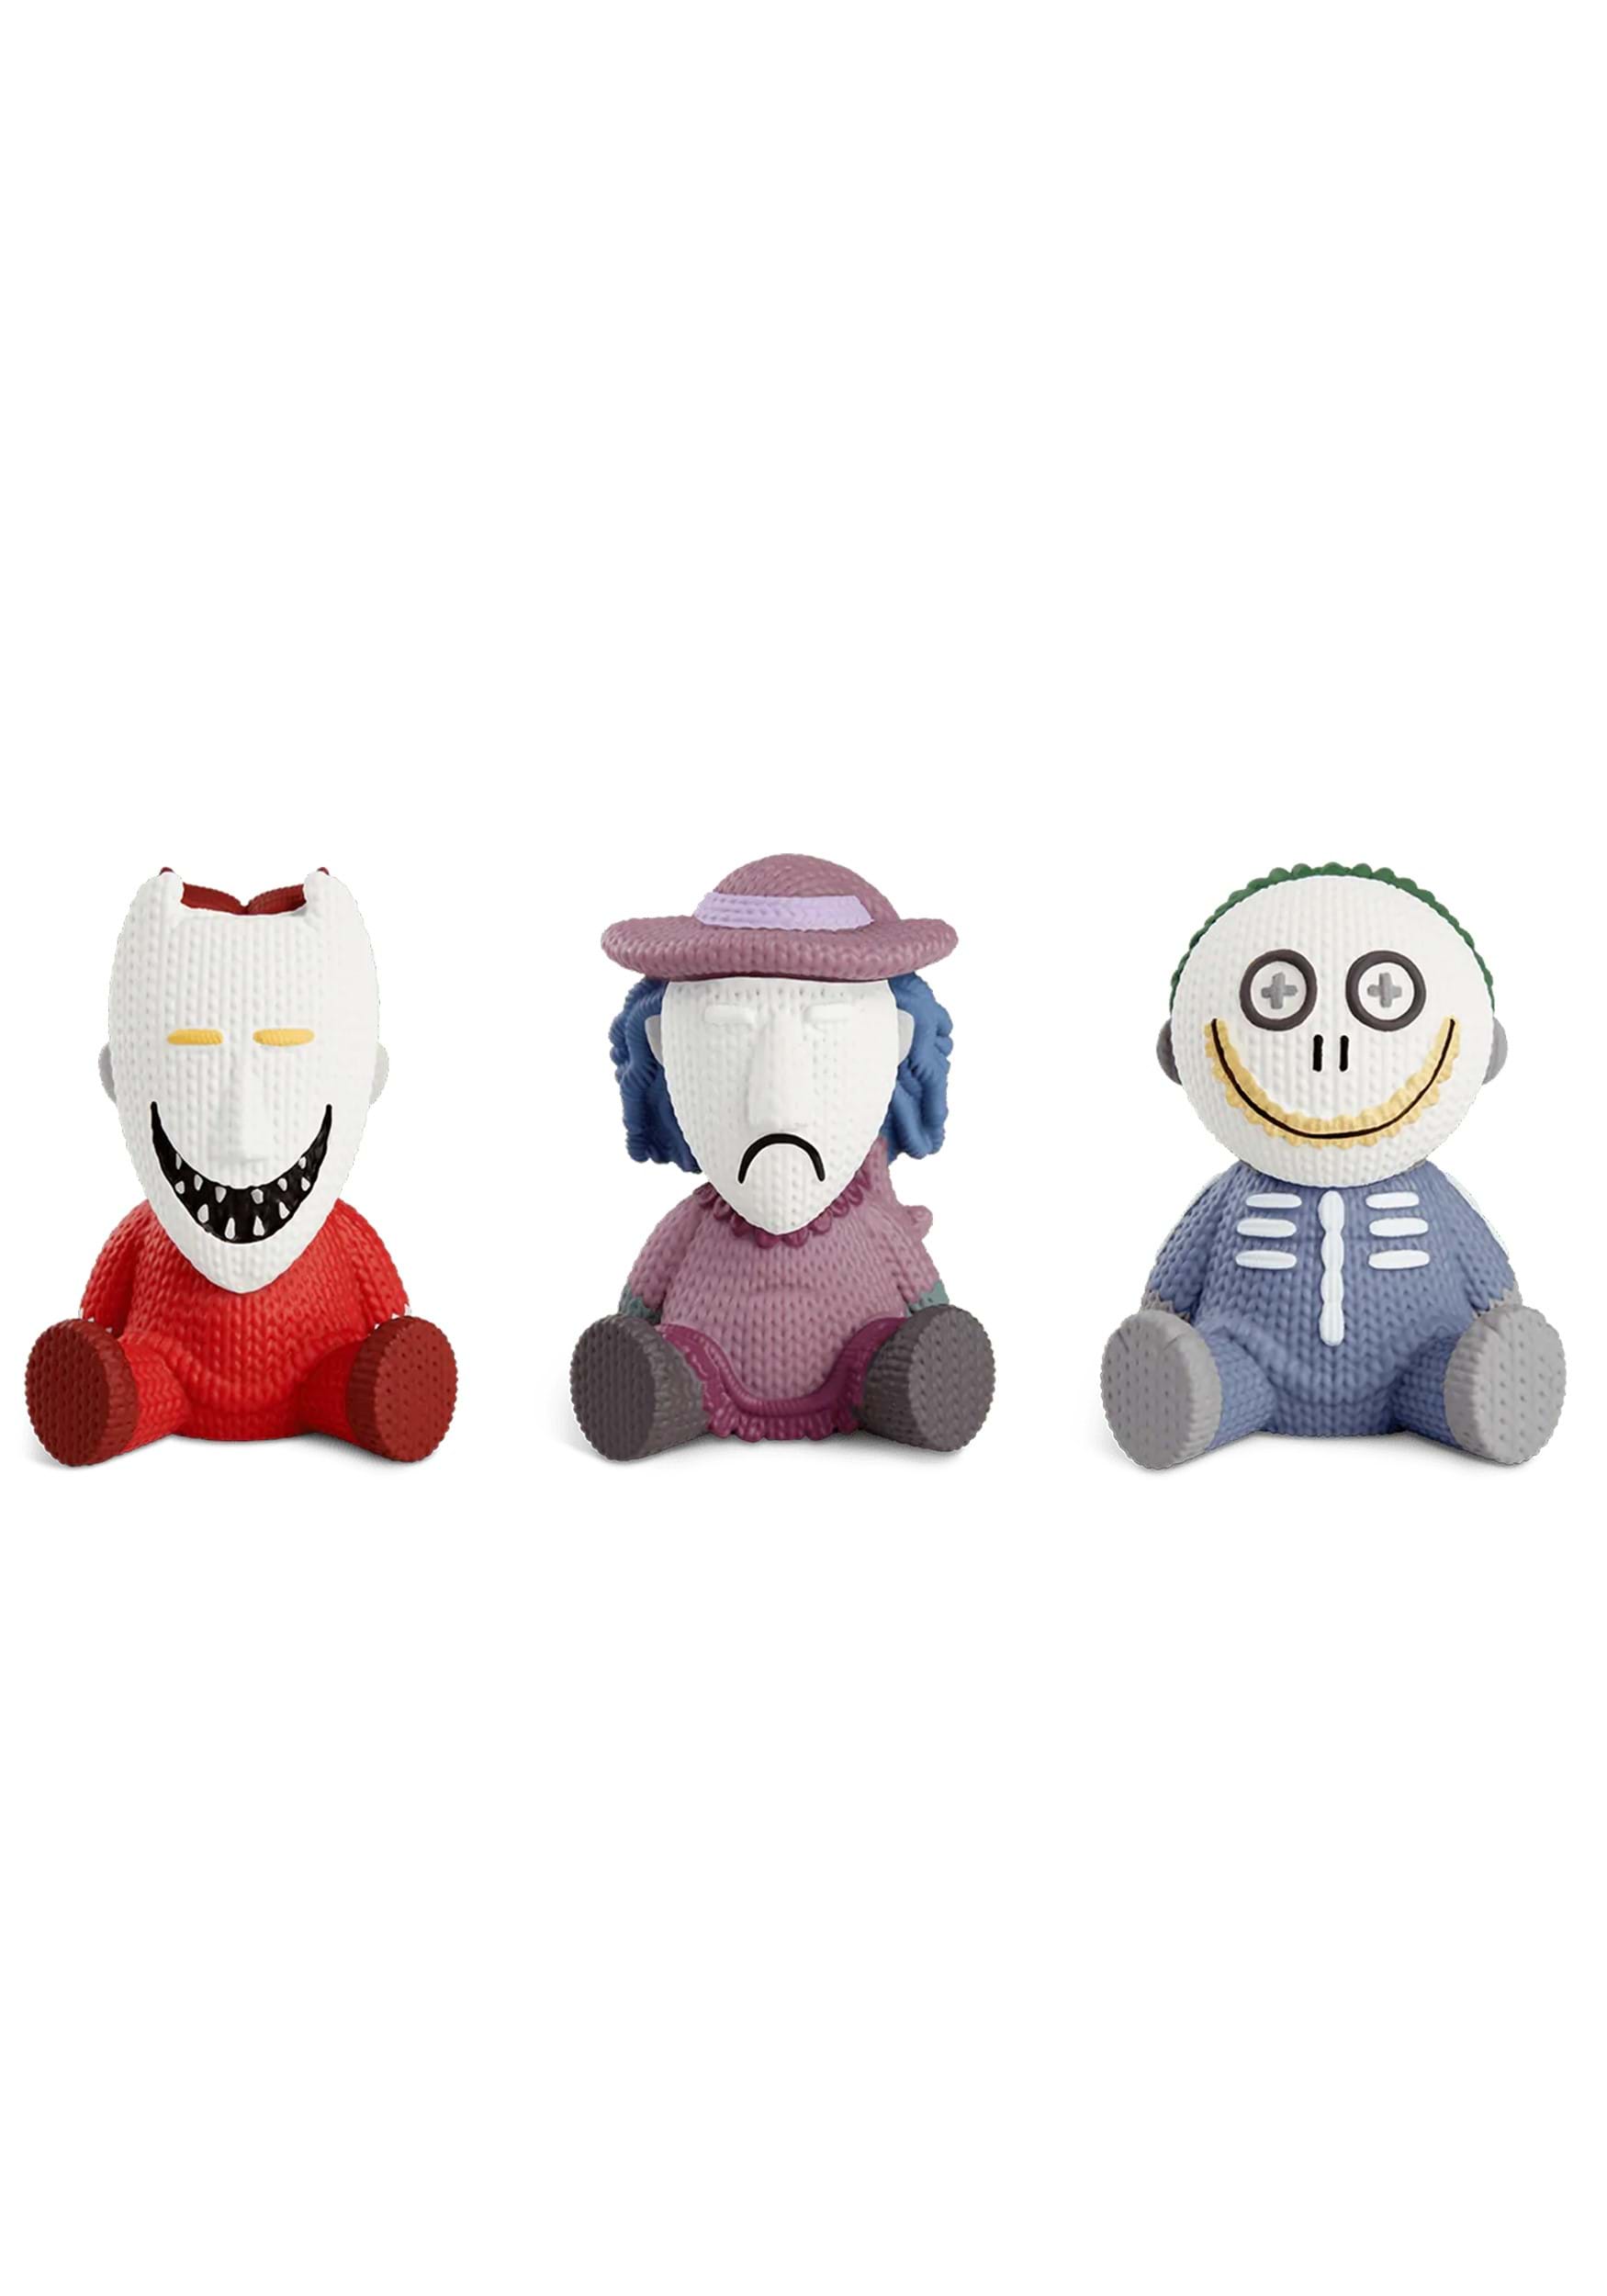 FISHER PRICE LITTLE PEOPLE: NIGHTMARE BEFORE CHRISTMAS (GLOW IN THE DARK)